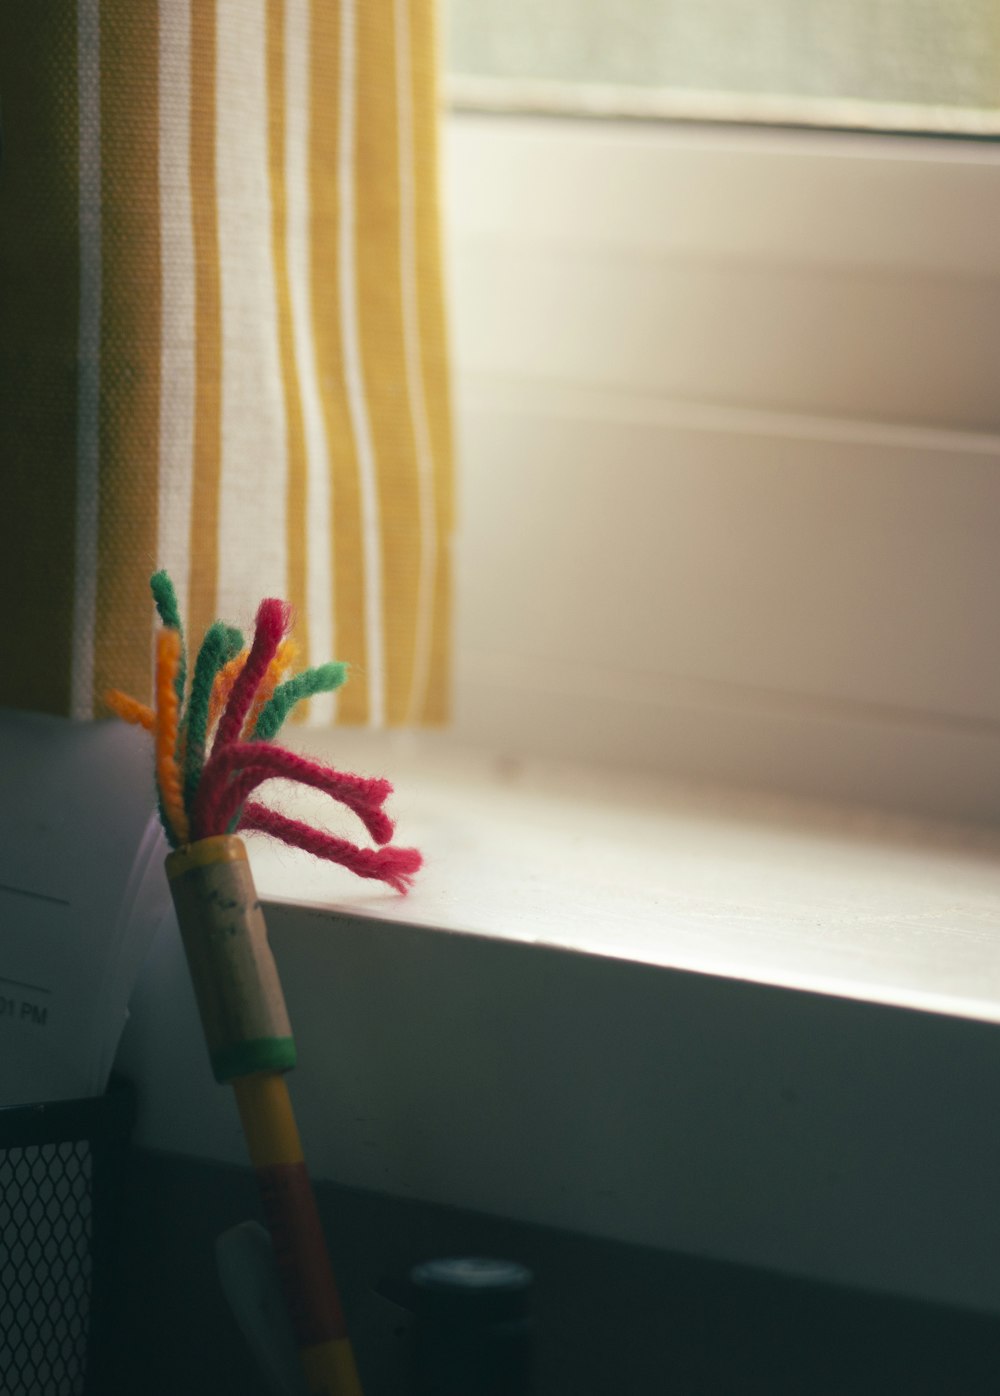 a pencil and some yarn on a window sill